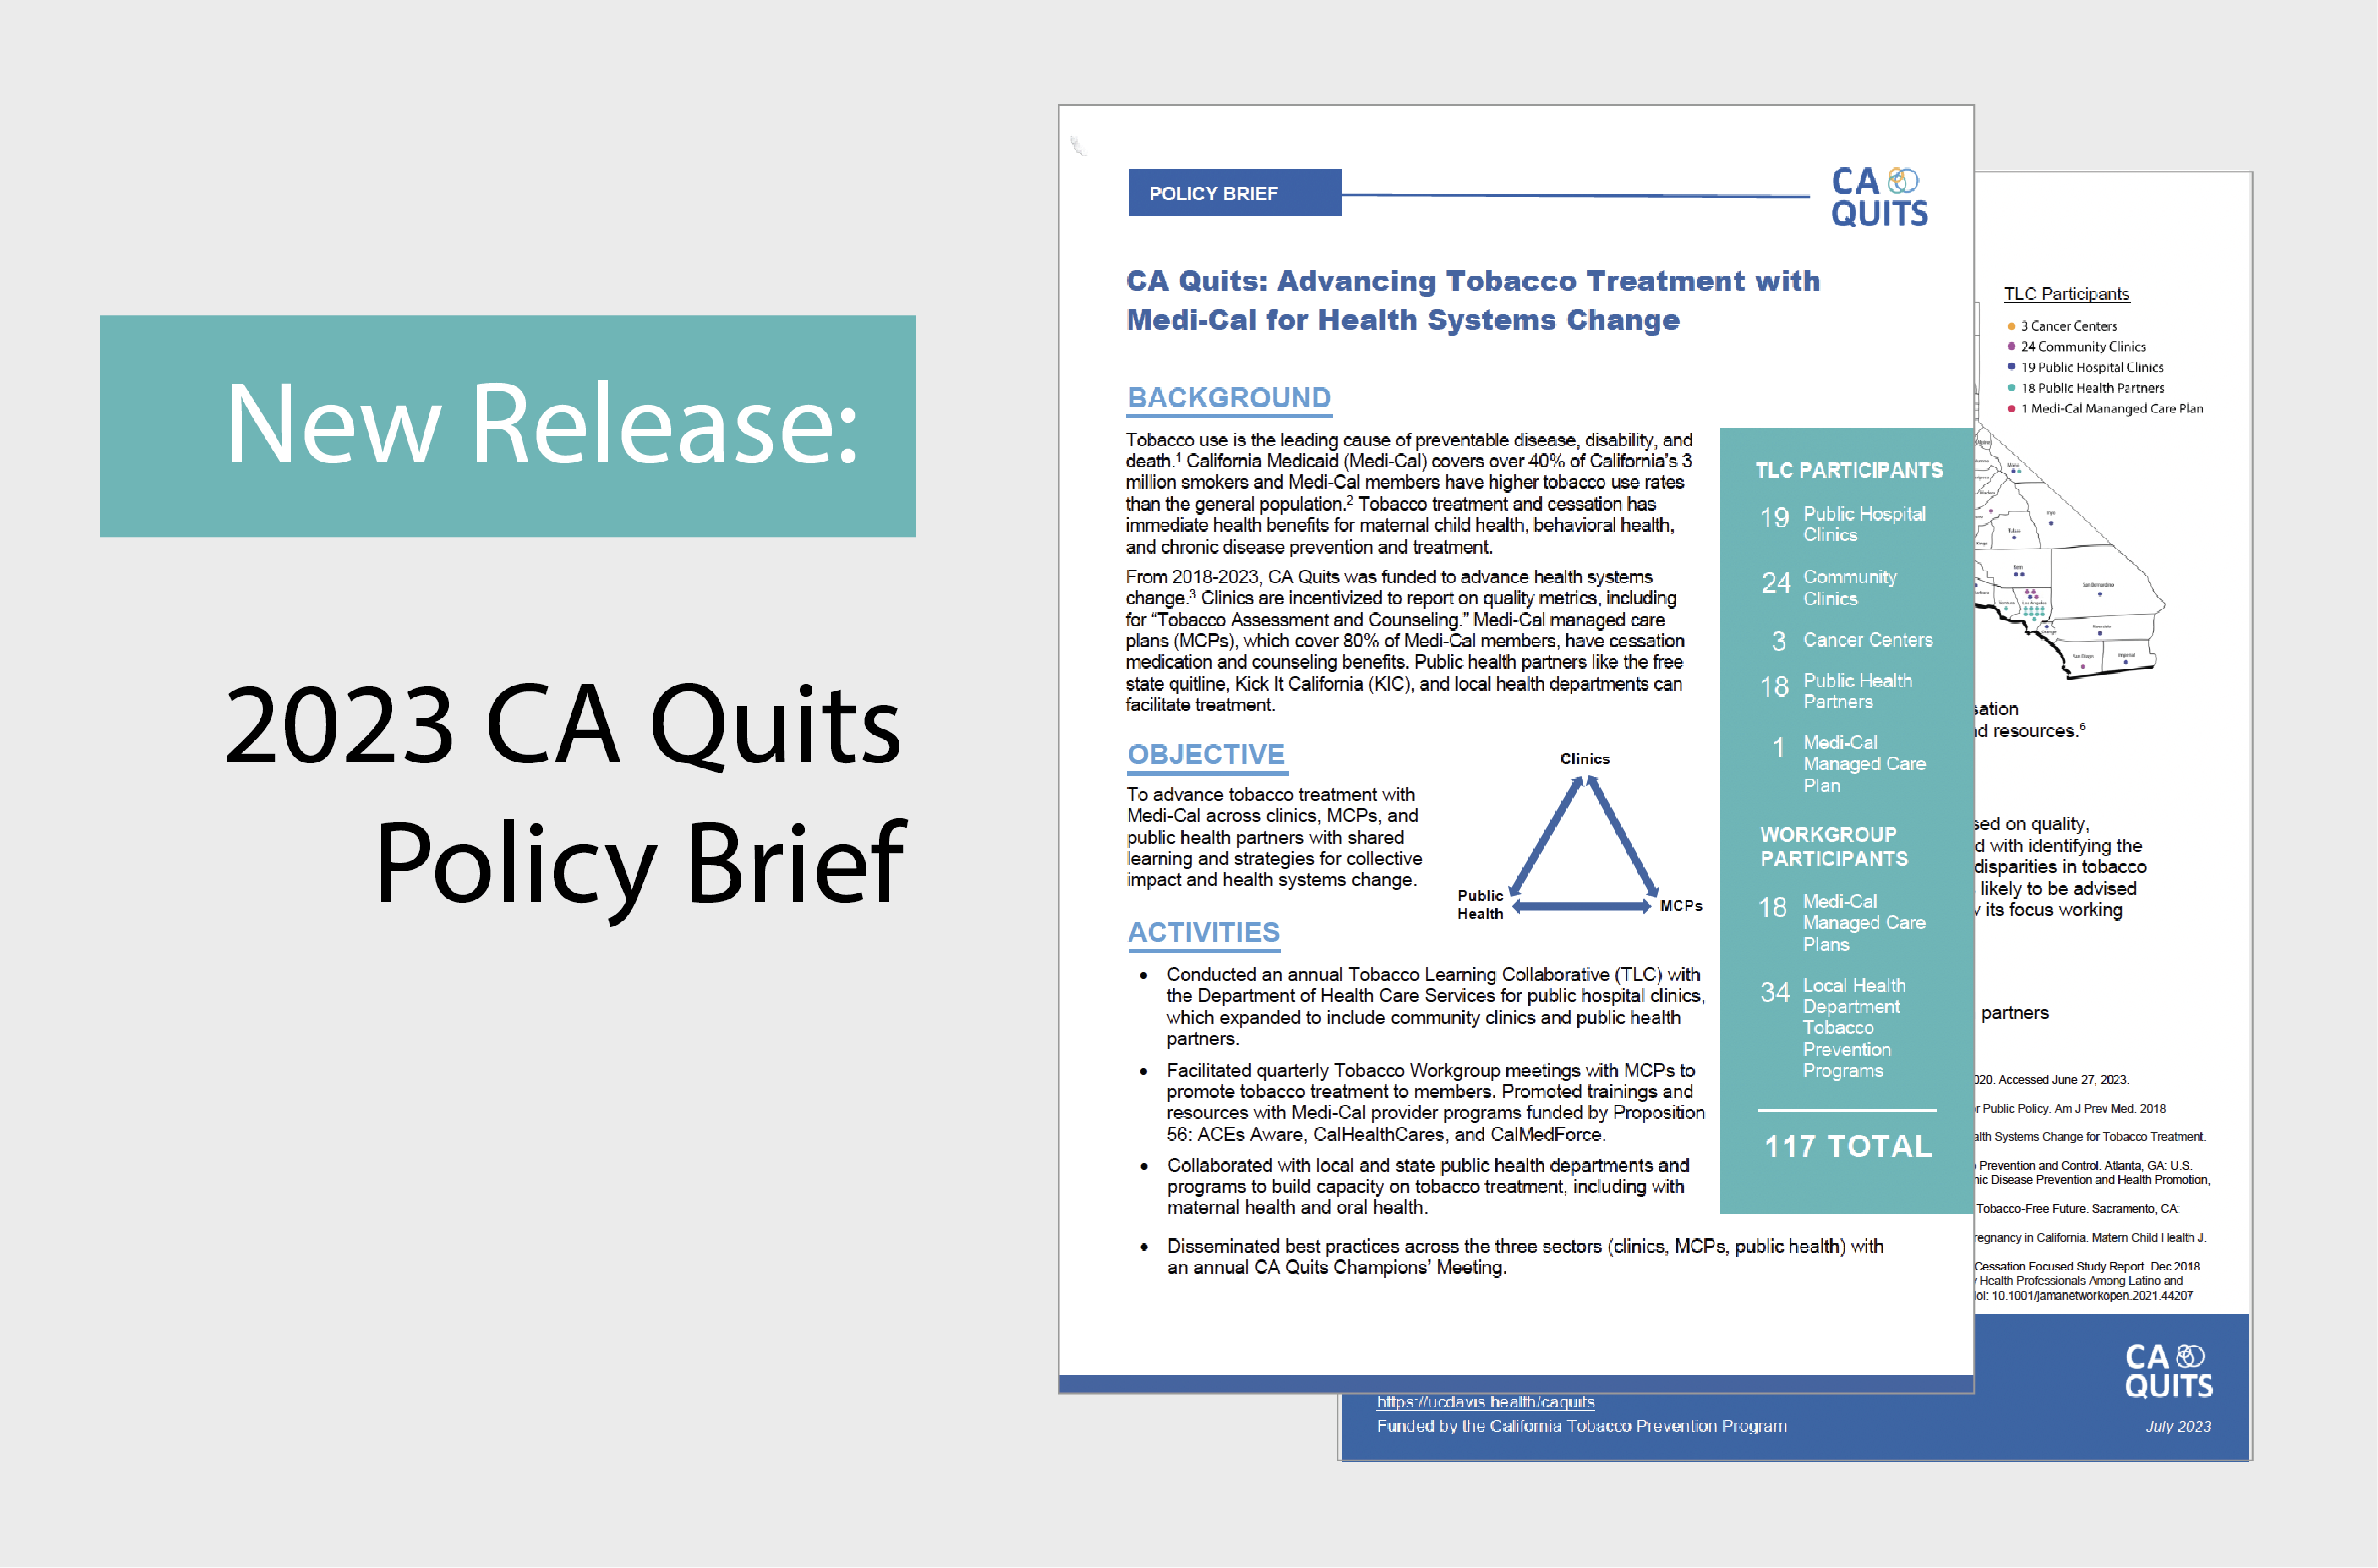 An image of the CA Quits policy brief 